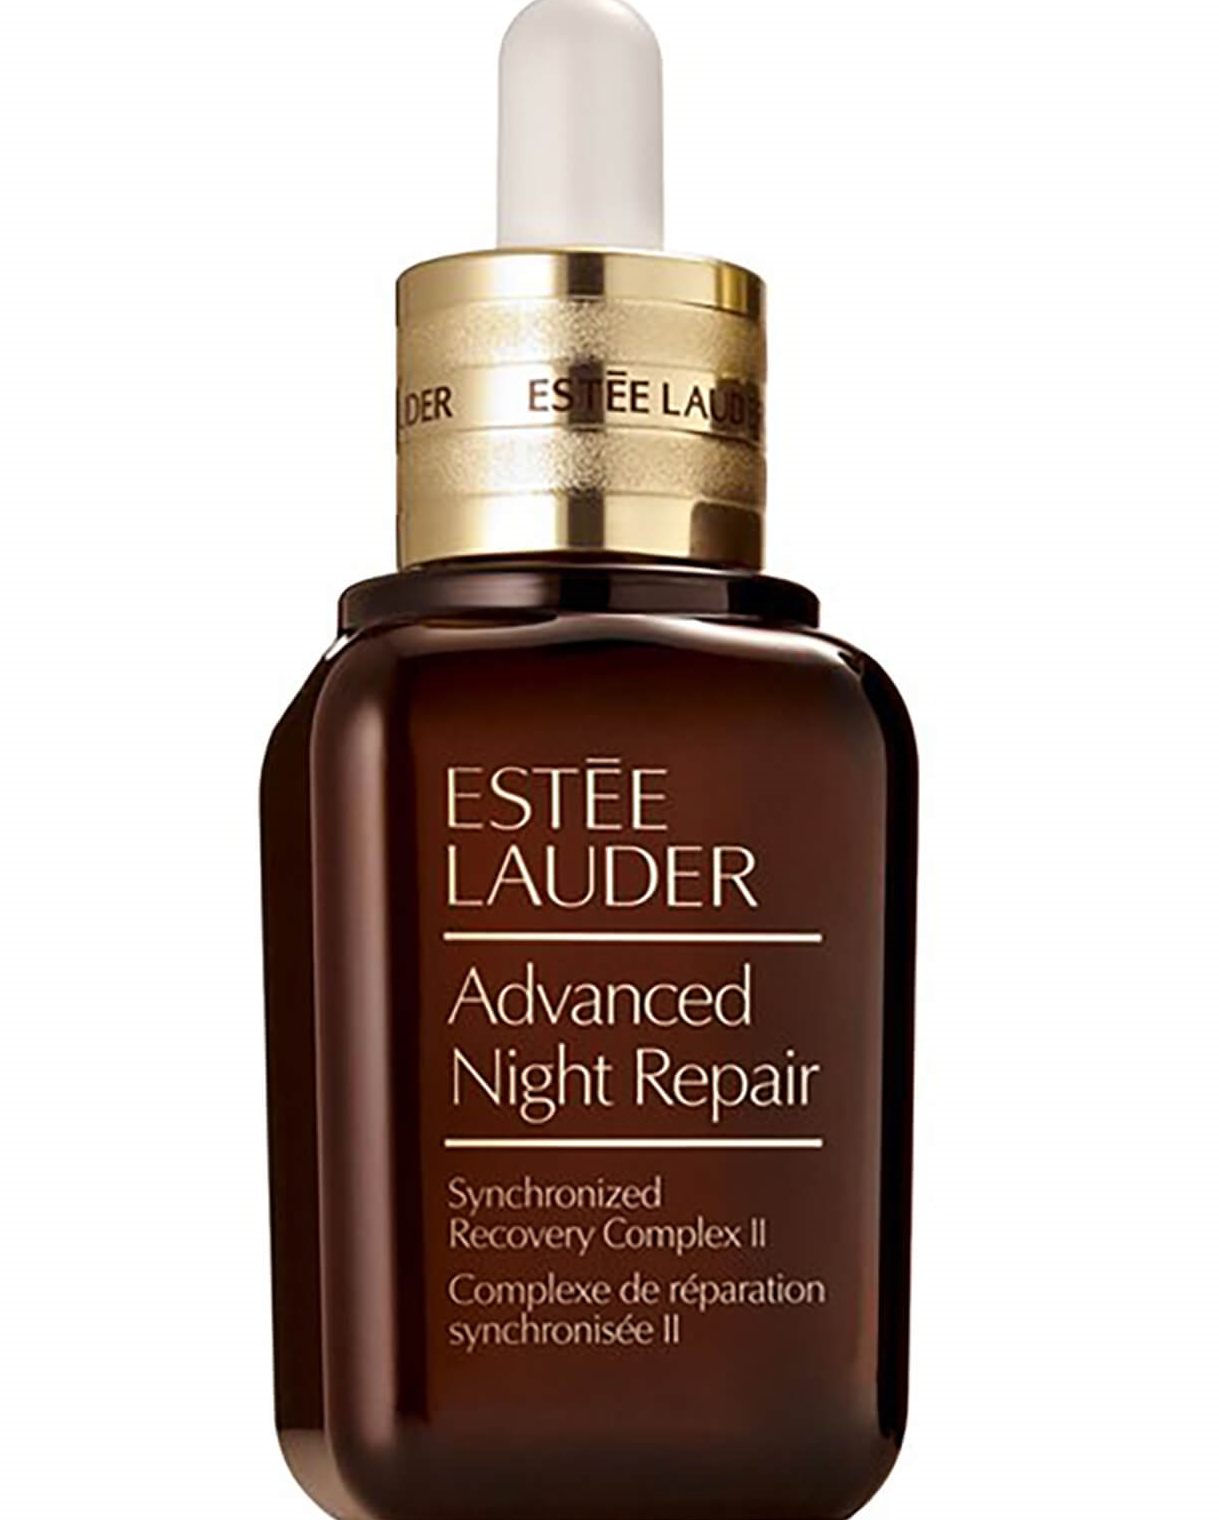 Estee Lauder Advanced Night Repair Synchronized Recovery Complex ll - Top 15 Picks from Nykaa Luxe Store - Best Skin Care Products for Anti-Aging, Fairness & De-Tan